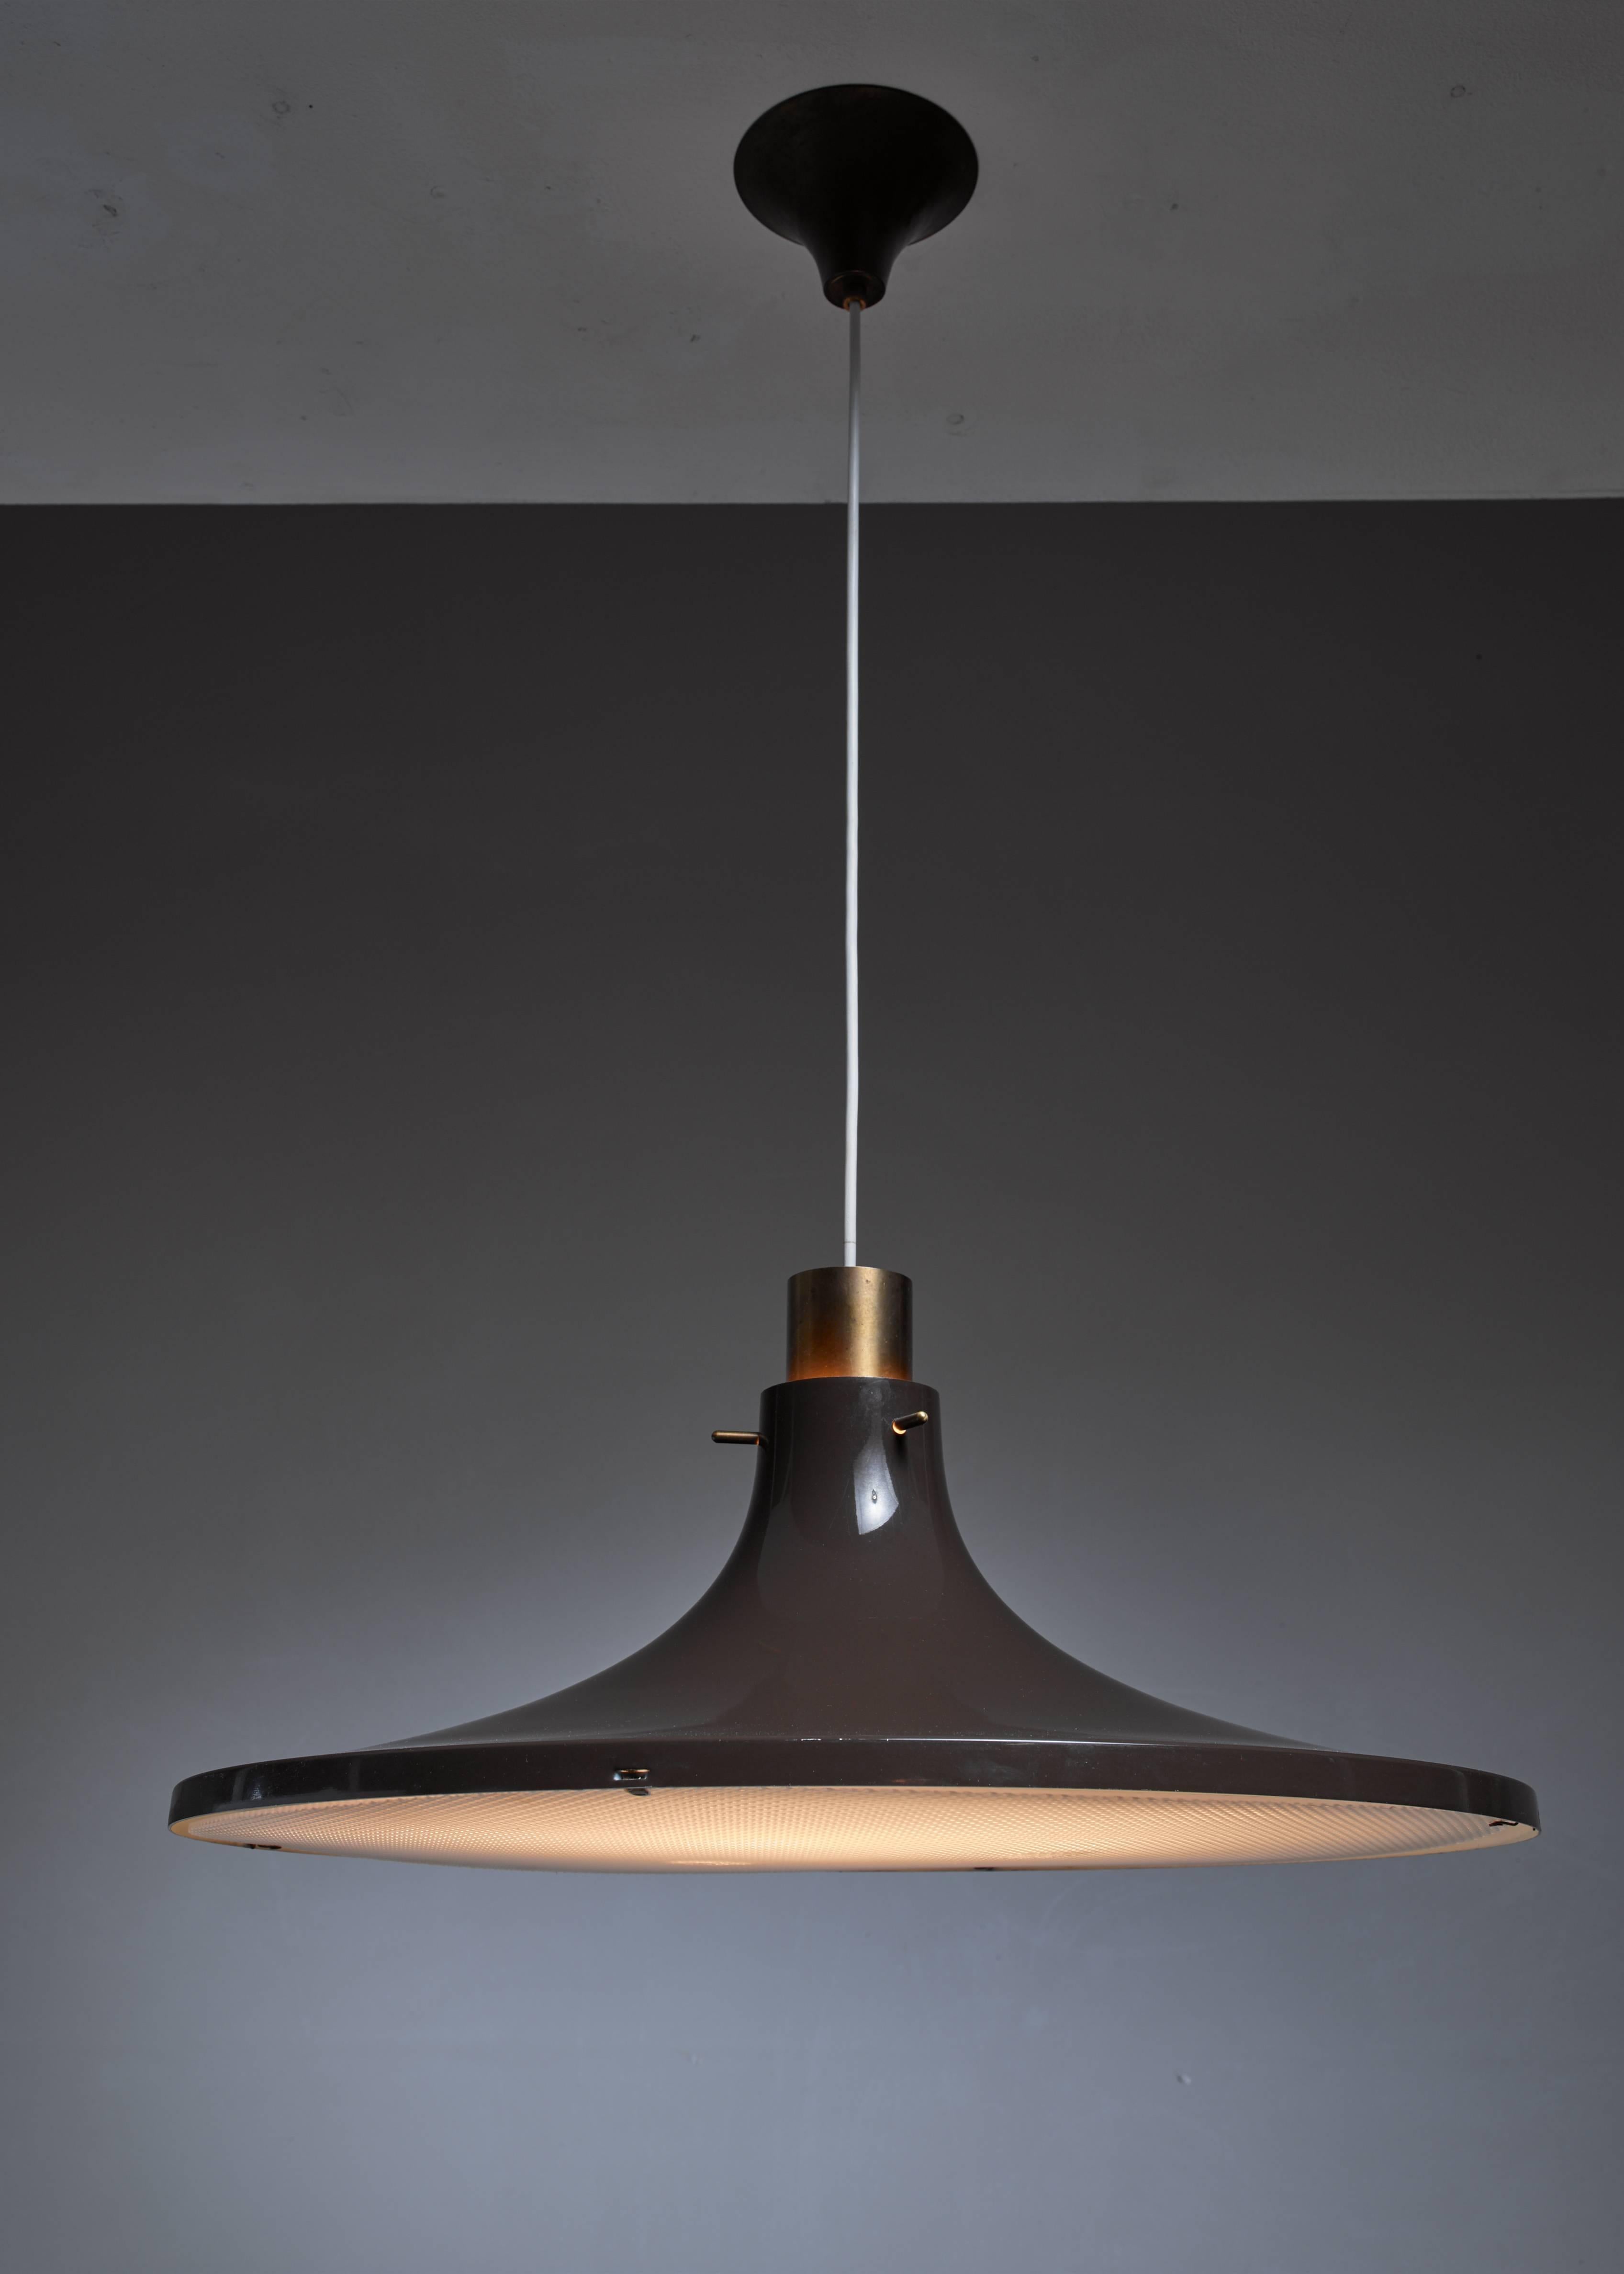 A pendant lamp by Hans-Agne Jakobsson. The lamp is made of brown lacquered metal. It has a brass element on top and a plastic diffuser underneath.
Labeled by Hans-Agne Jakobsson, Markaryd.